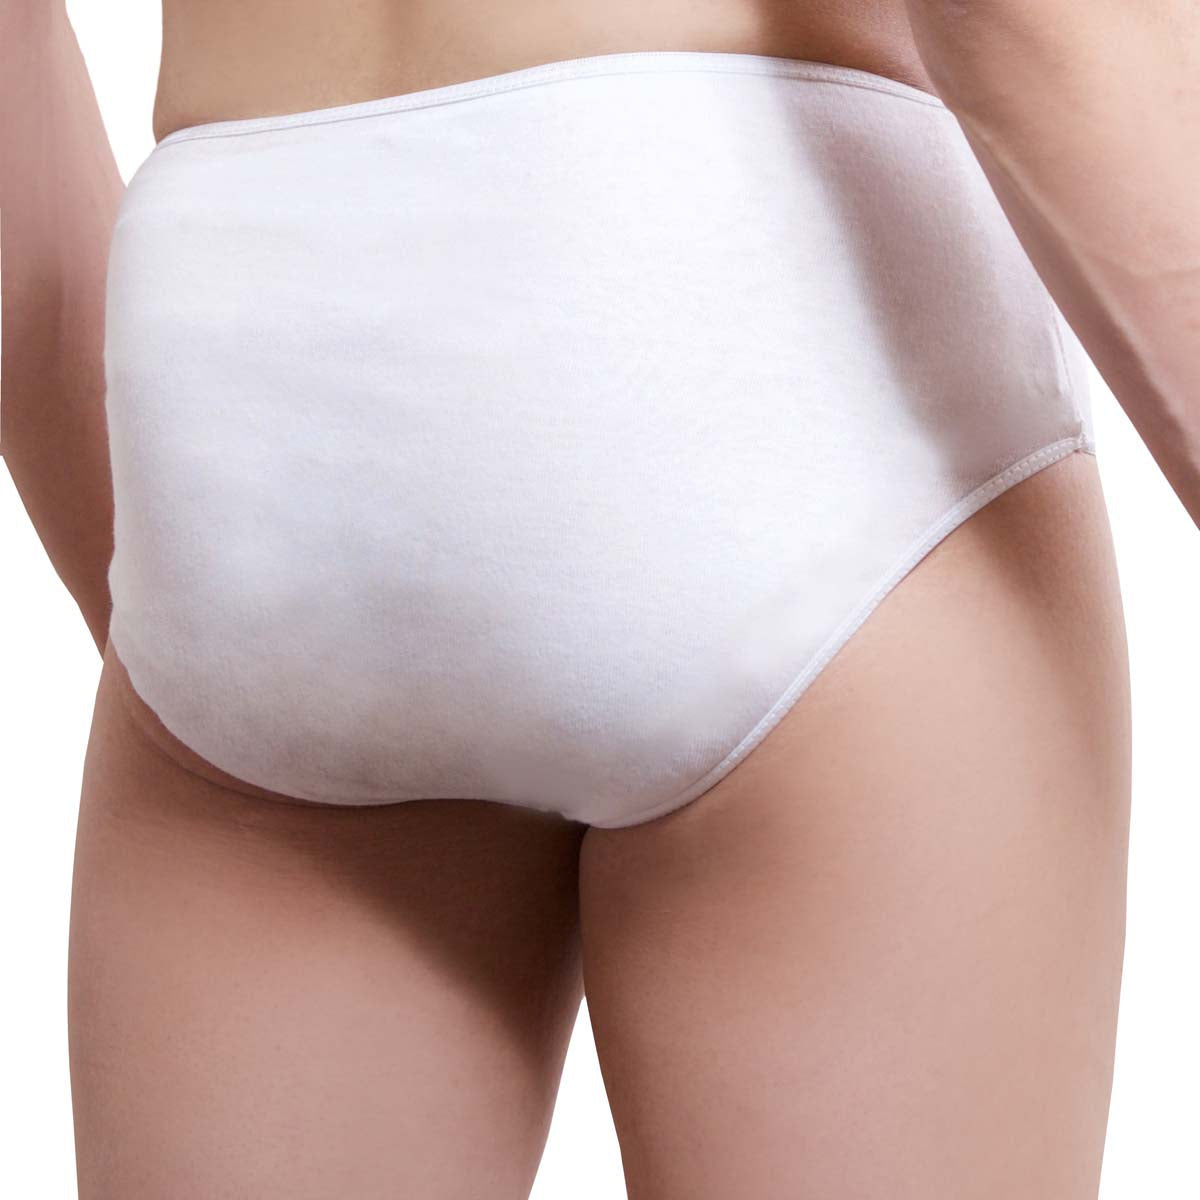 Large Disposable Mens Underwear With Flat Angle Design And Non Woven Fabric  For Foot Bath, Health, And Sanitization From Jeff_yellow, $152.05